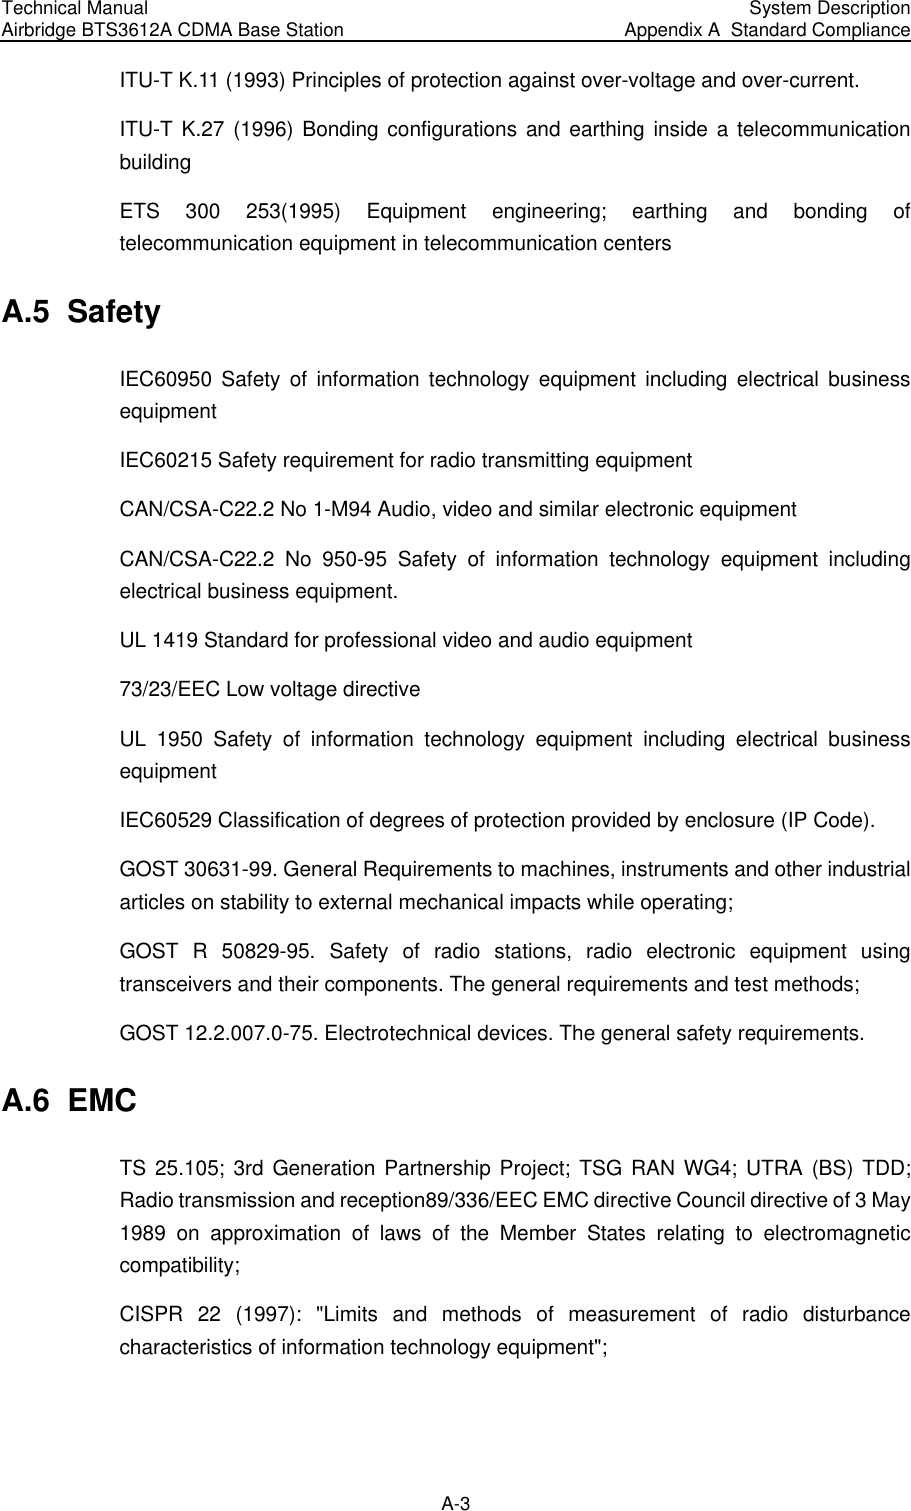 Technical Manual Airbridge BTS3612A CDMA Base Station  System Description Appendix A  Standard Compliance  A-3 ITU-T K.11 (1993) Principles of protection against over-voltage and over-current. ITU-T K.27 (1996) Bonding configurations and earthing inside a telecommunication building ETS 300 253(1995) Equipment engineering; earthing and bonding of telecommunication equipment in telecommunication centers A.5  Safety IEC60950 Safety of information technology equipment including electrical business equipment IEC60215 Safety requirement for radio transmitting equipment CAN/CSA-C22.2 No 1-M94 Audio, video and similar electronic equipment CAN/CSA-C22.2 No 950-95 Safety of information technology equipment including electrical business equipment. UL 1419 Standard for professional video and audio equipment 73/23/EEC Low voltage directive UL 1950 Safety of information technology equipment including electrical business equipment IEC60529 Classification of degrees of protection provided by enclosure (IP Code). GOST 30631-99. General Requirements to machines, instruments and other industrial articles on stability to external mechanical impacts while operating; GOST R 50829-95. Safety of radio stations, radio electronic equipment using transceivers and their components. The general requirements and test methods; GOST 12.2.007.0-75. Electrotechnical devices. The general safety requirements. A.6  EMC TS 25.105; 3rd Generation Partnership Project; TSG RAN WG4; UTRA (BS) TDD; Radio transmission and reception89/336/EEC EMC directive Council directive of 3 May 1989 on approximation of laws of the Member States relating to electromagnetic compatibility; CISPR 22 (1997): &quot;Limits and methods of measurement of radio disturbance characteristics of information technology equipment&quot;; 